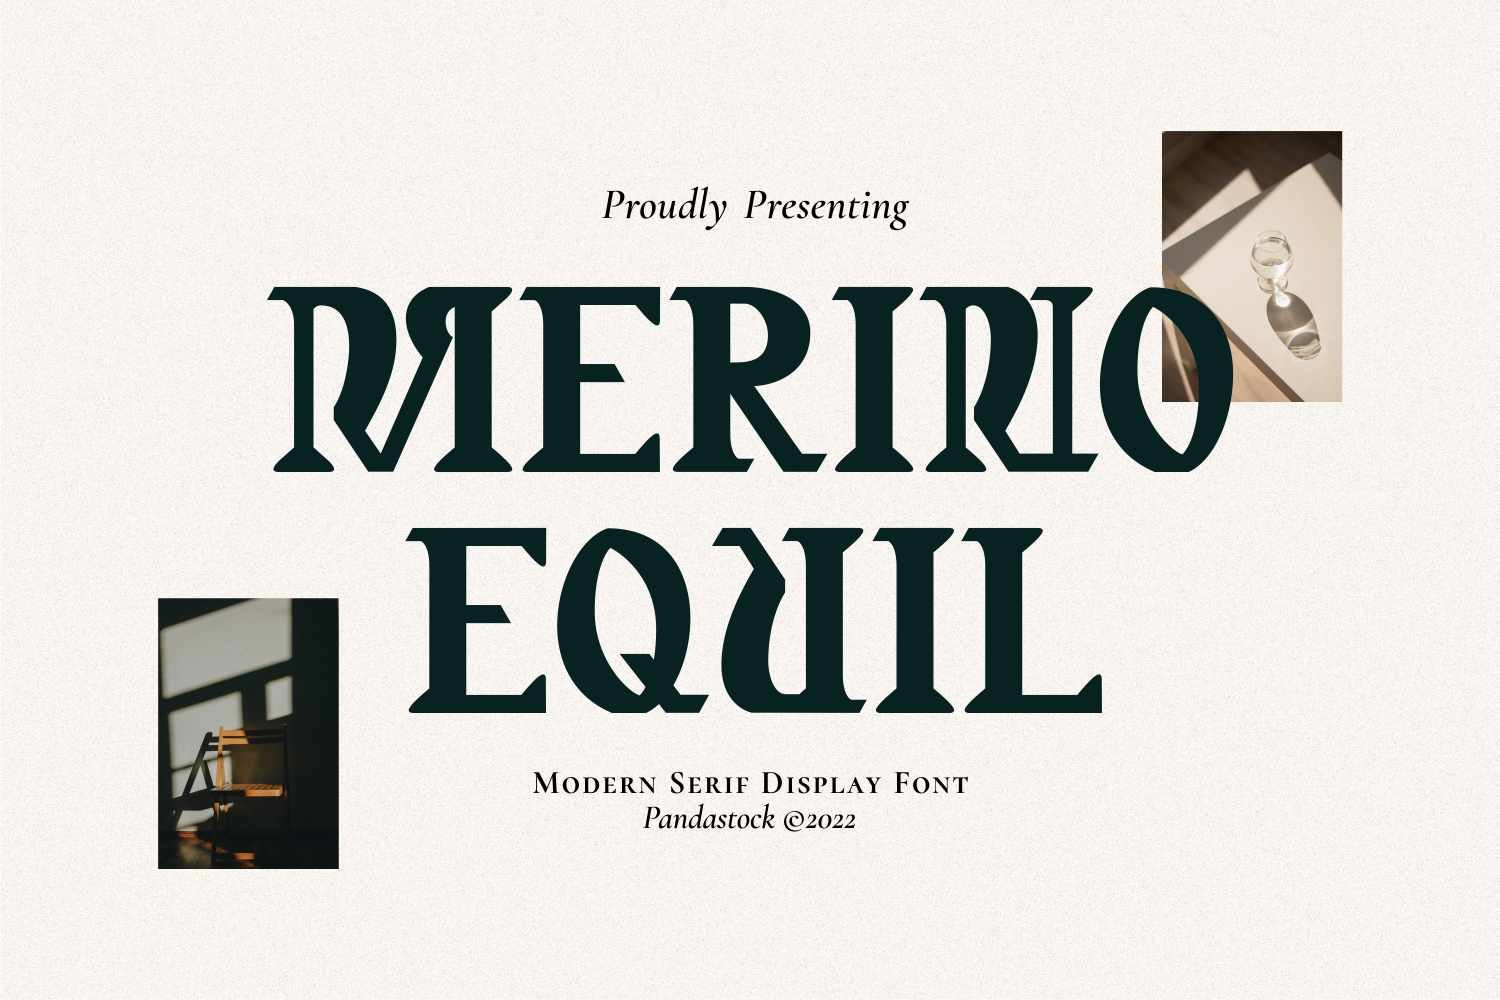 Merino Equil Classic Serif Fonts cover image.